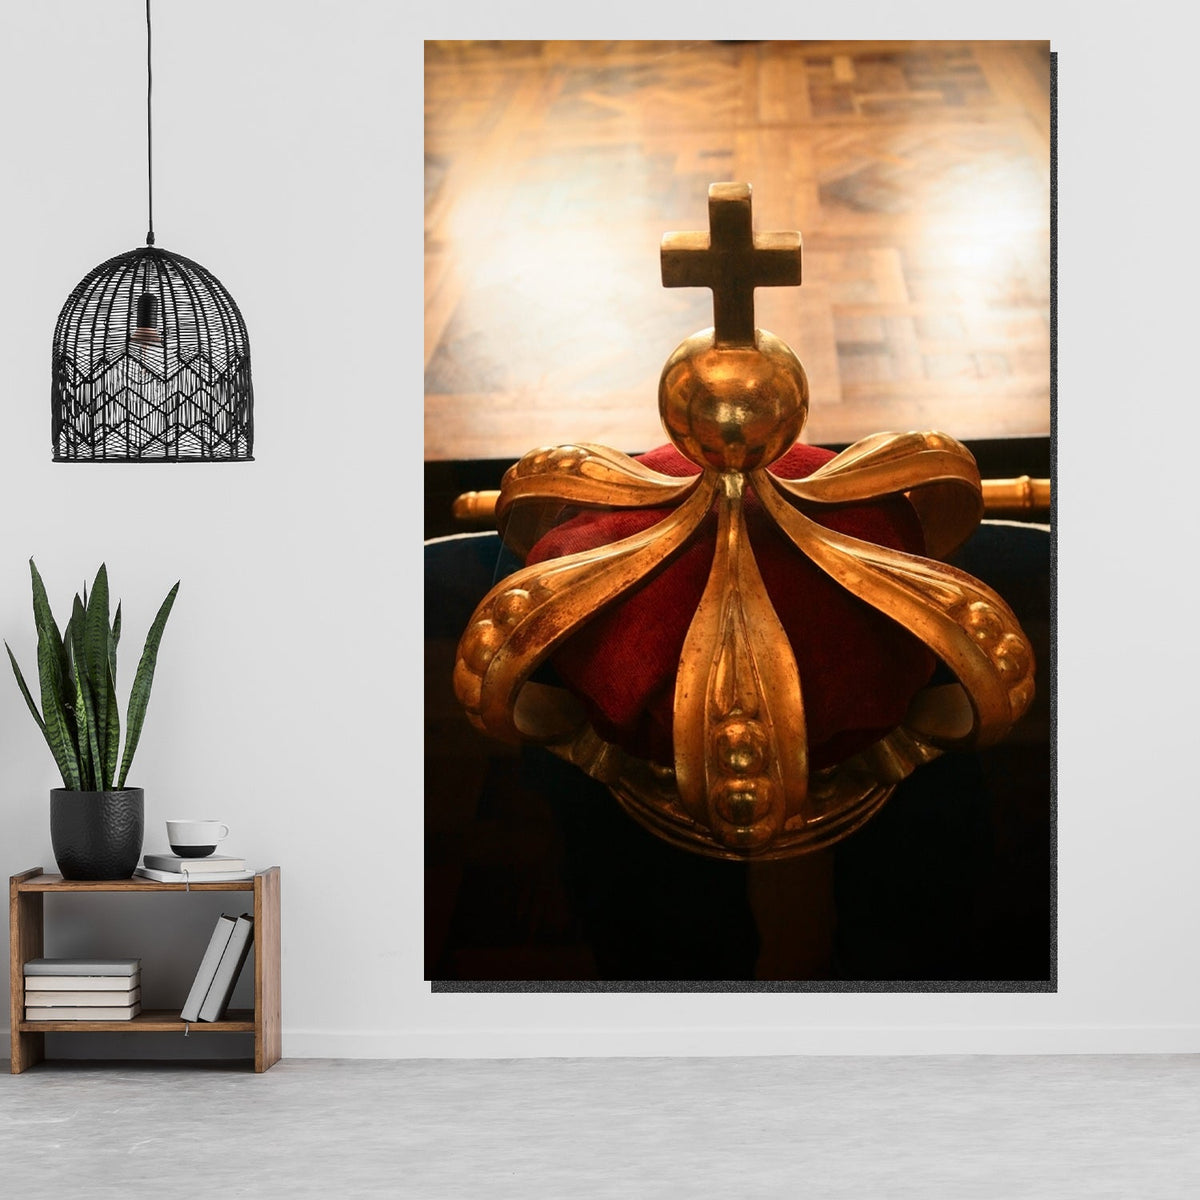 https://cdn.shopify.com/s/files/1/0387/9986/8044/products/TheCrucifixandCrownCanvasArtprintStretched-2.jpg